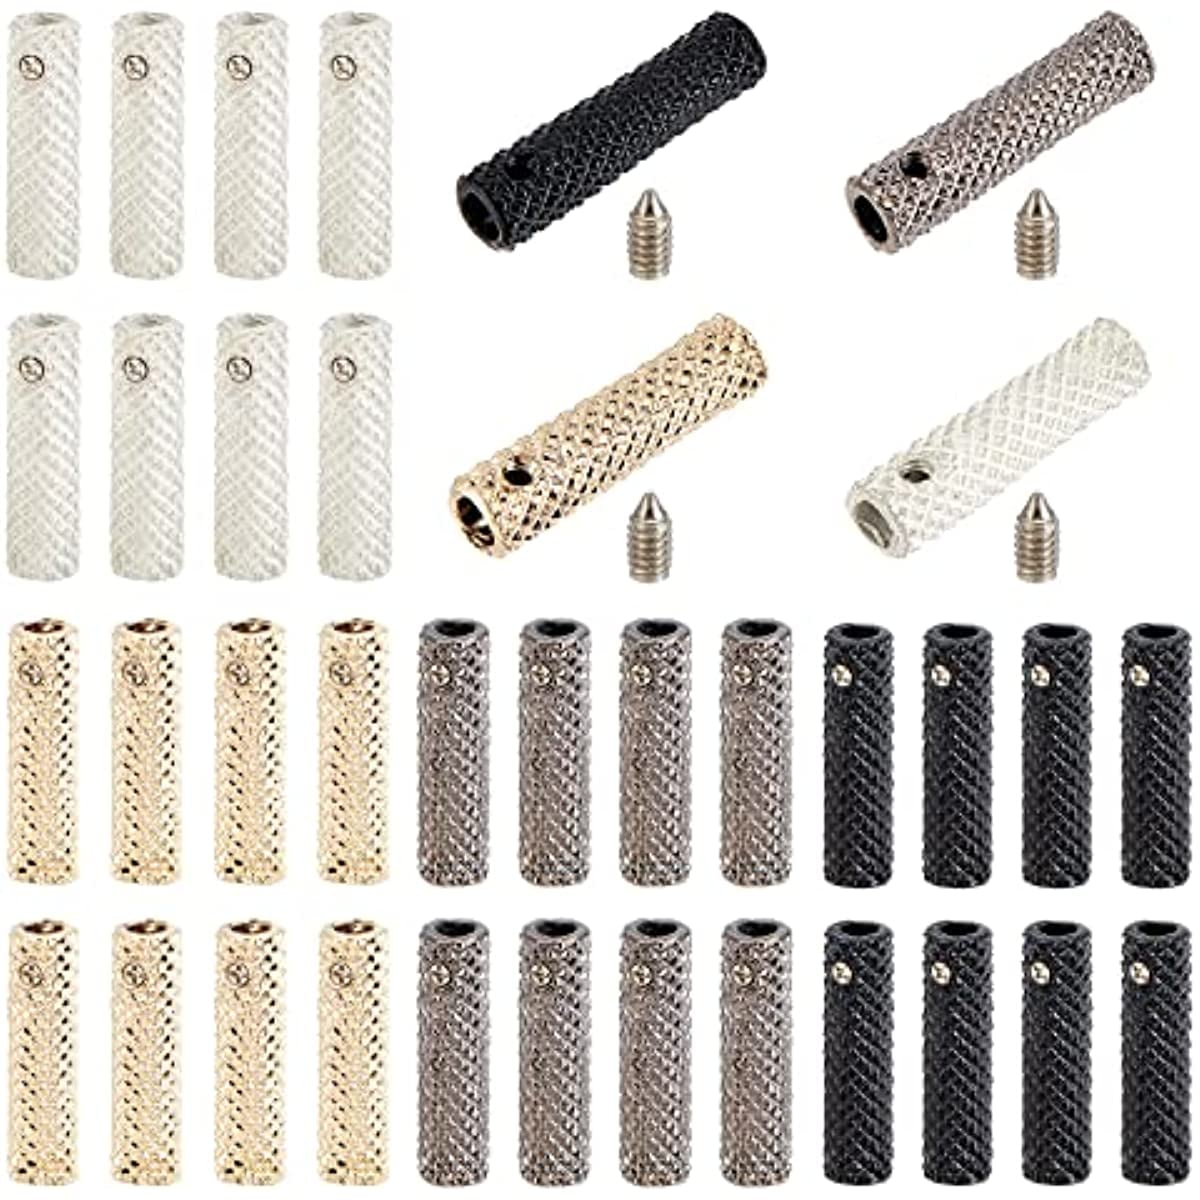 32 Sets 8 Style Alloy Aglets for Shoelaces 